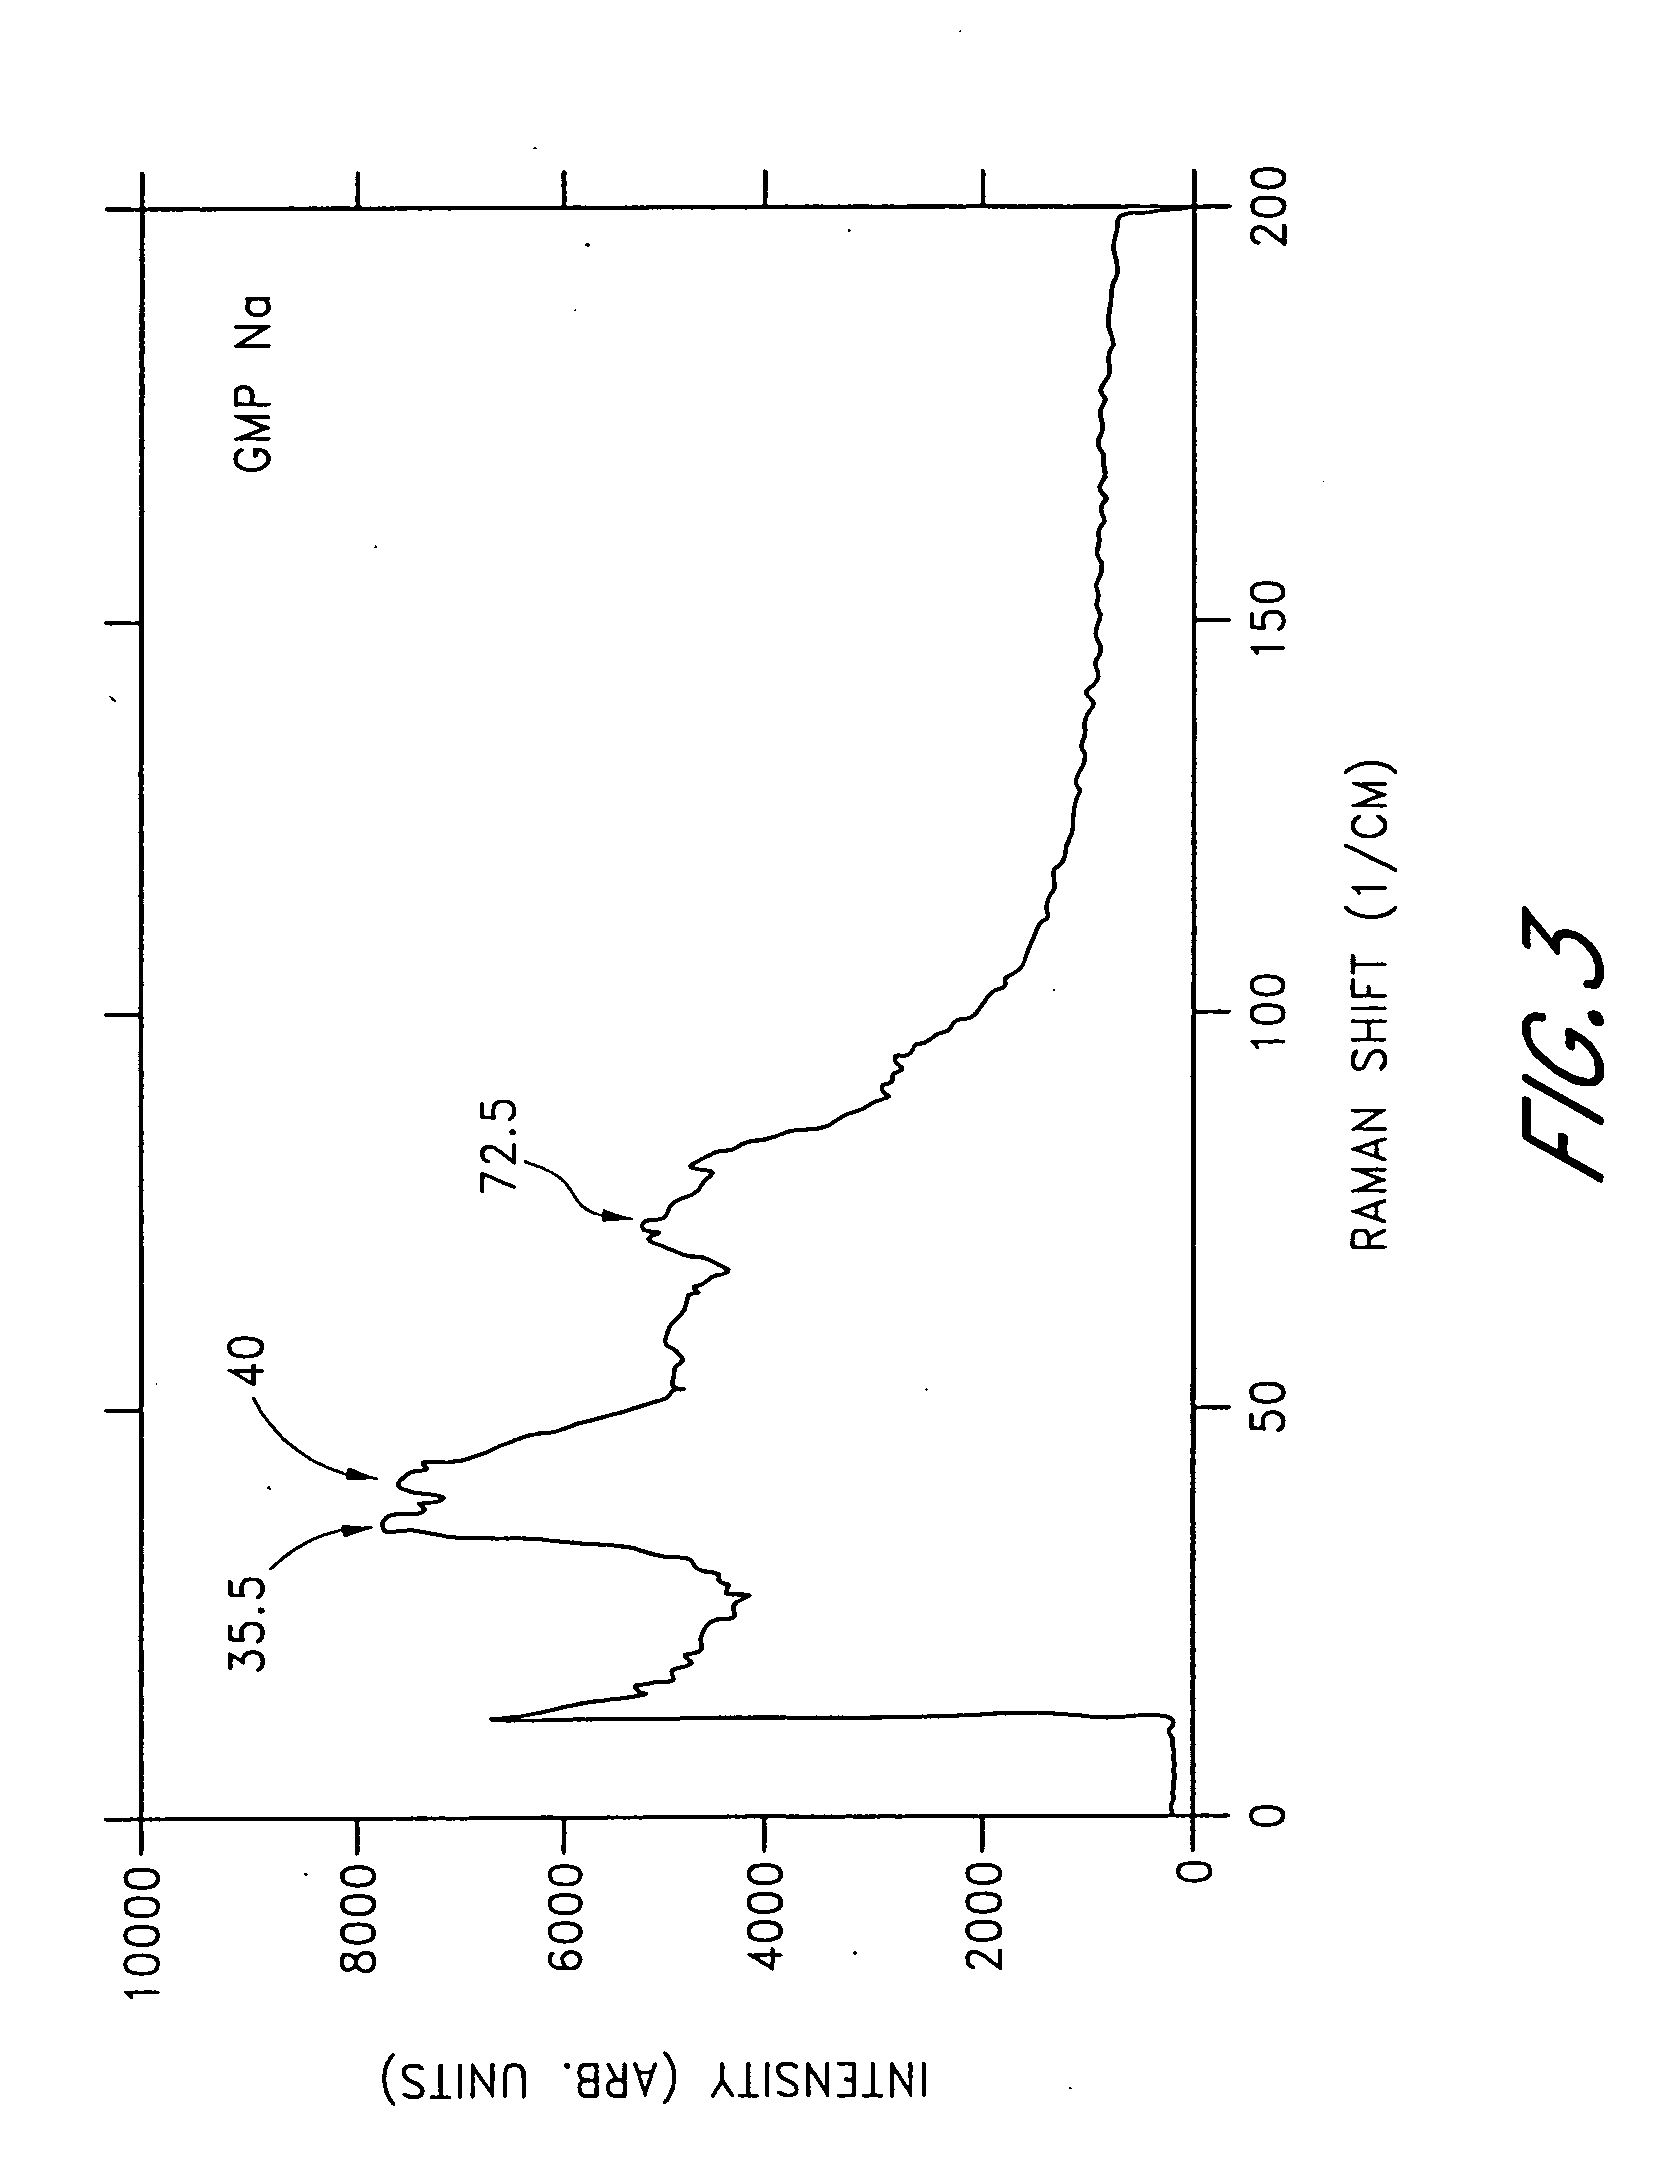 Apparatus and method for the analysis of nucleic acids hydbridization on high density NA chips